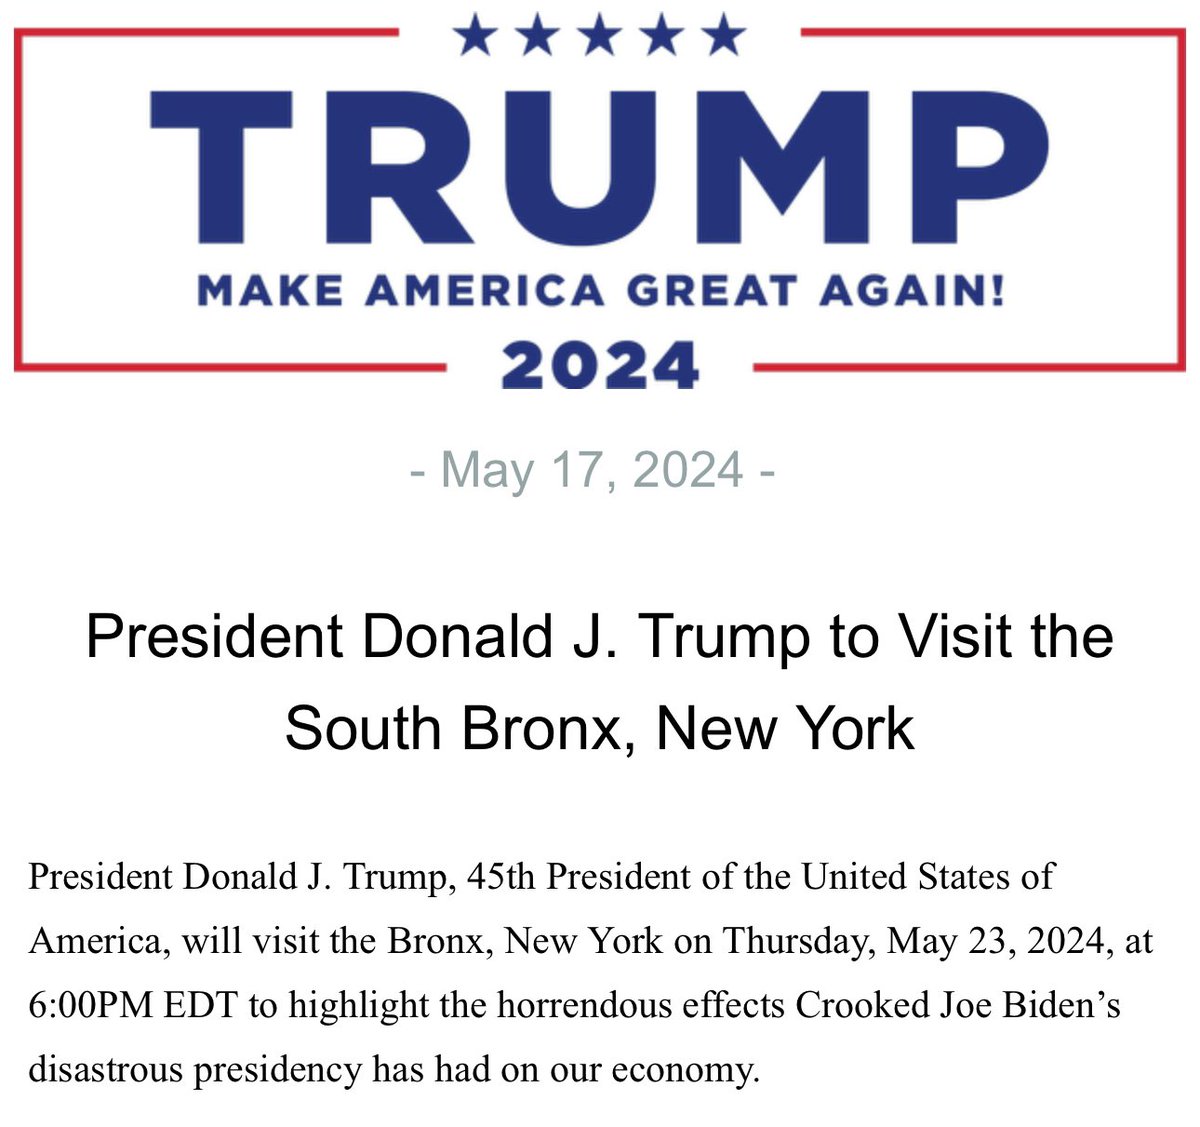 Trump is holding a rally in South Bronx next week 🔥🔥🔥